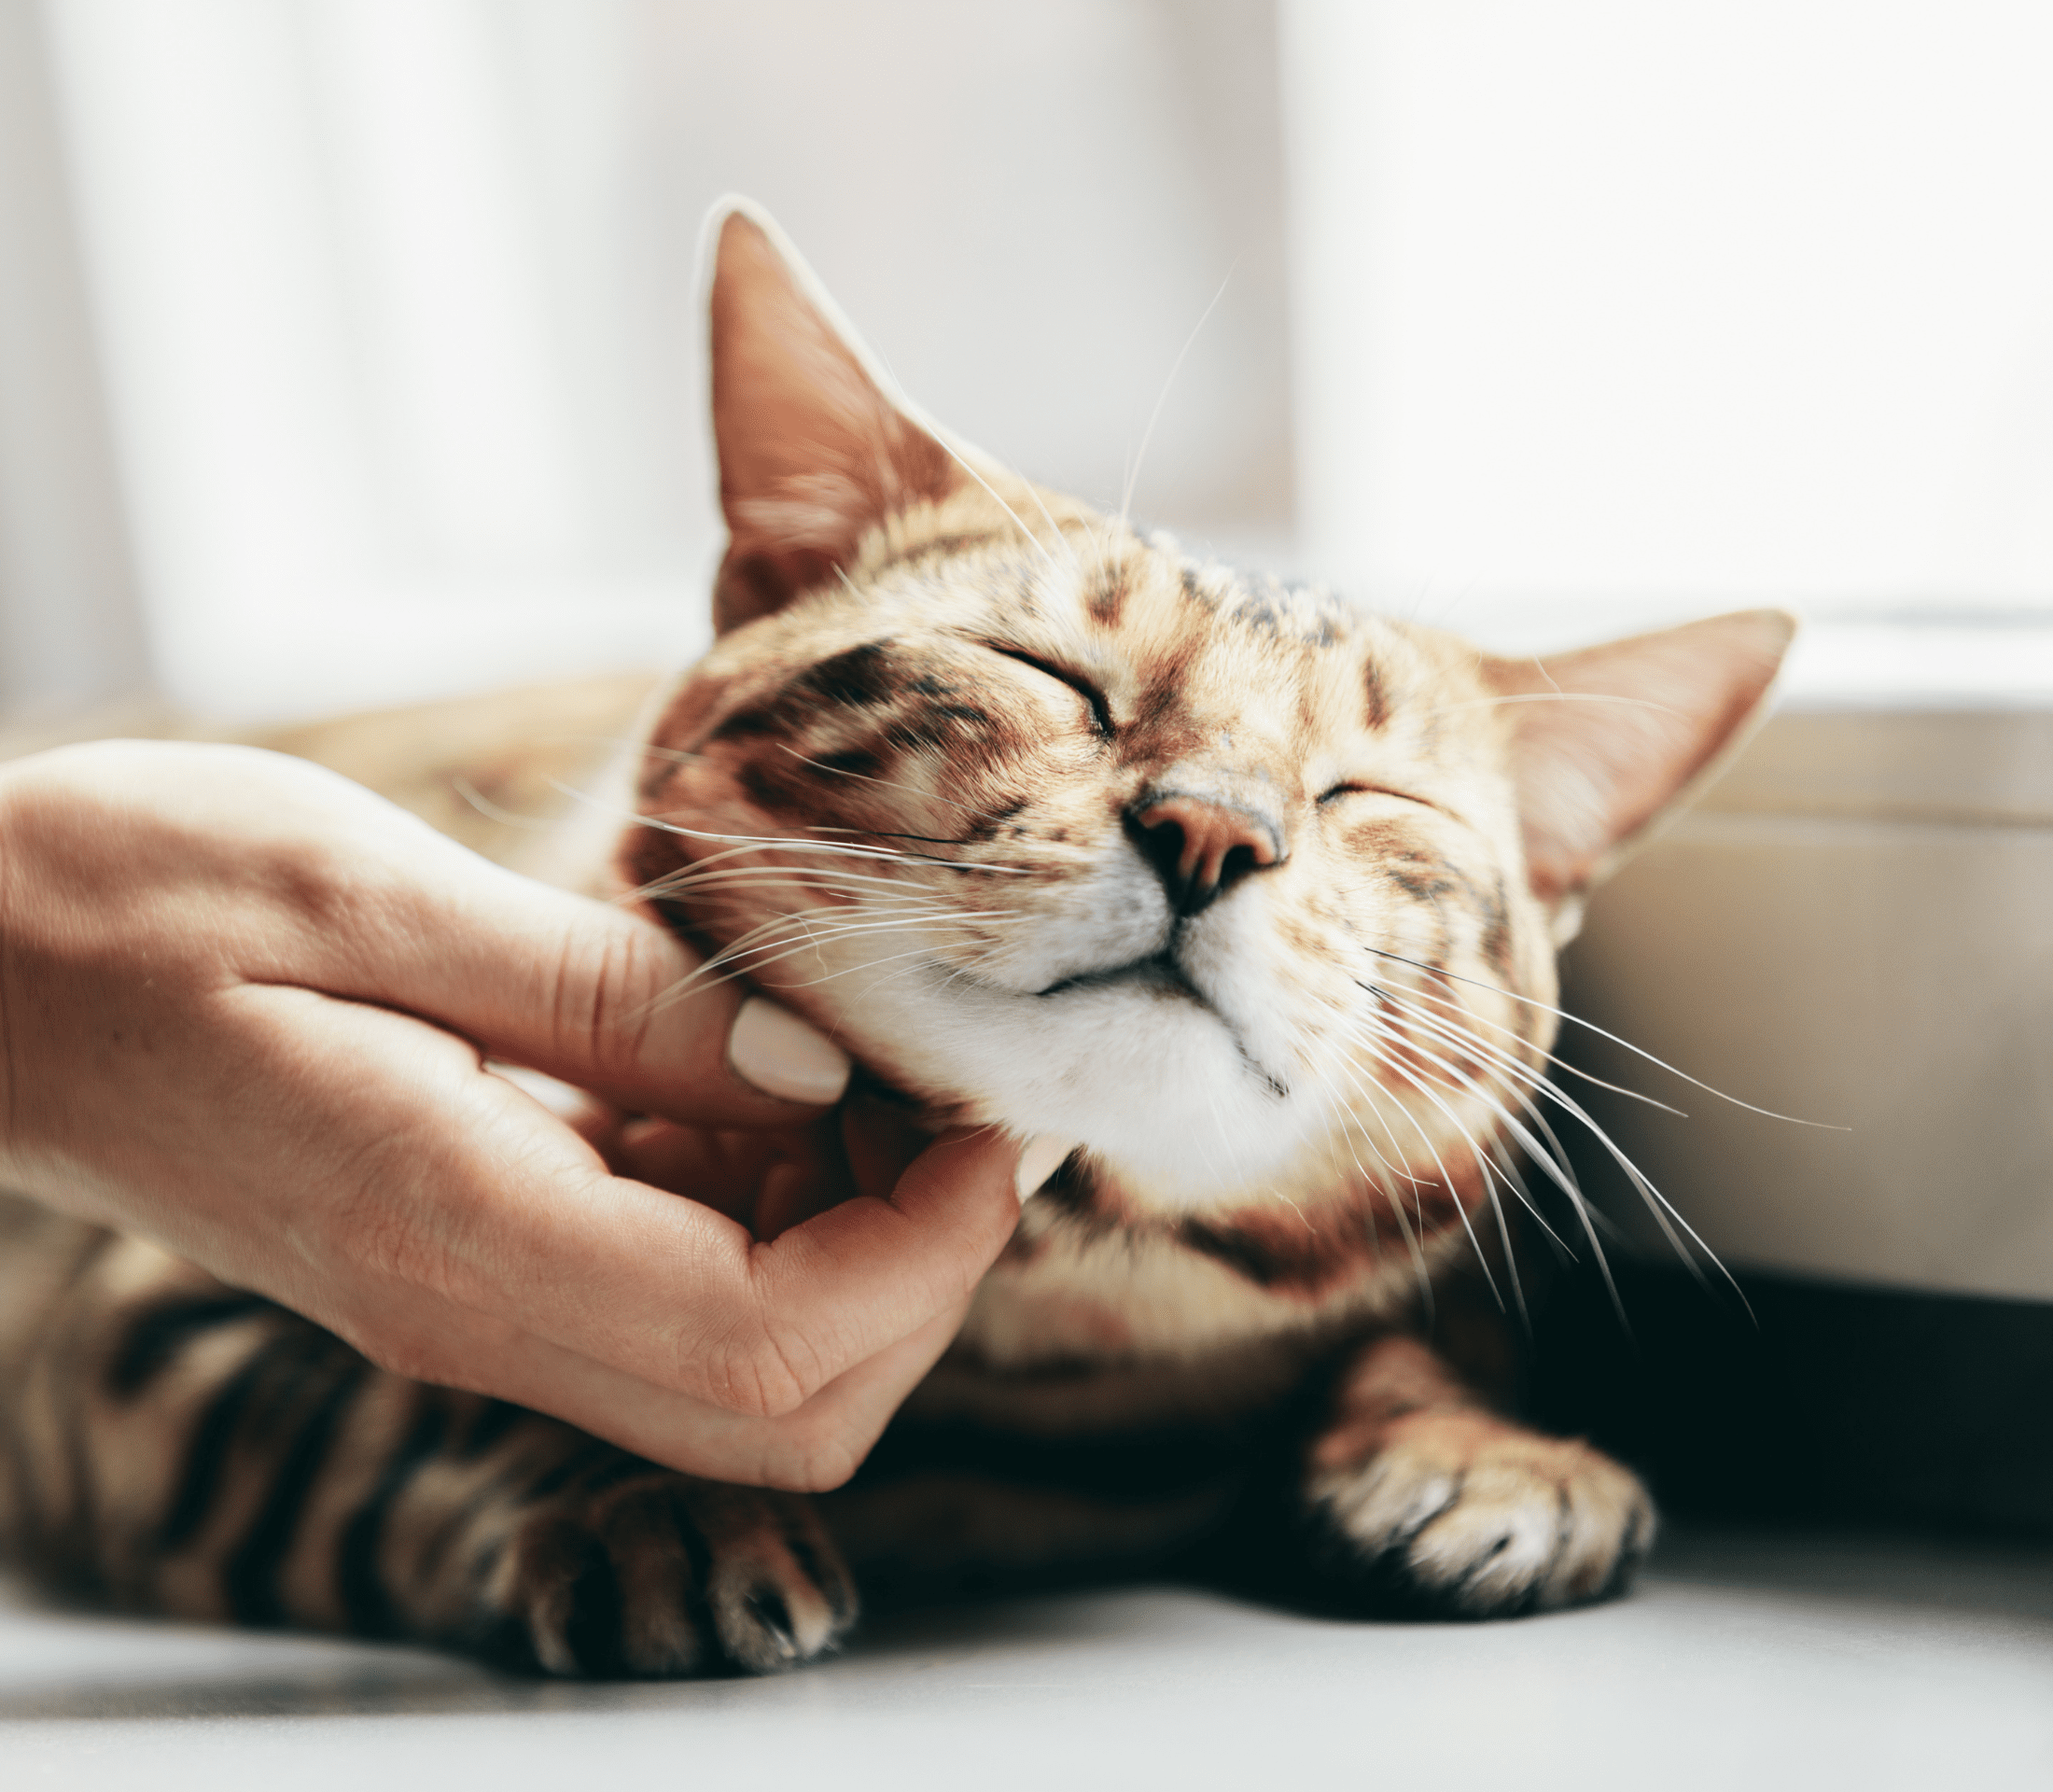 Brownish tabby cat getting a hand rub on the neck